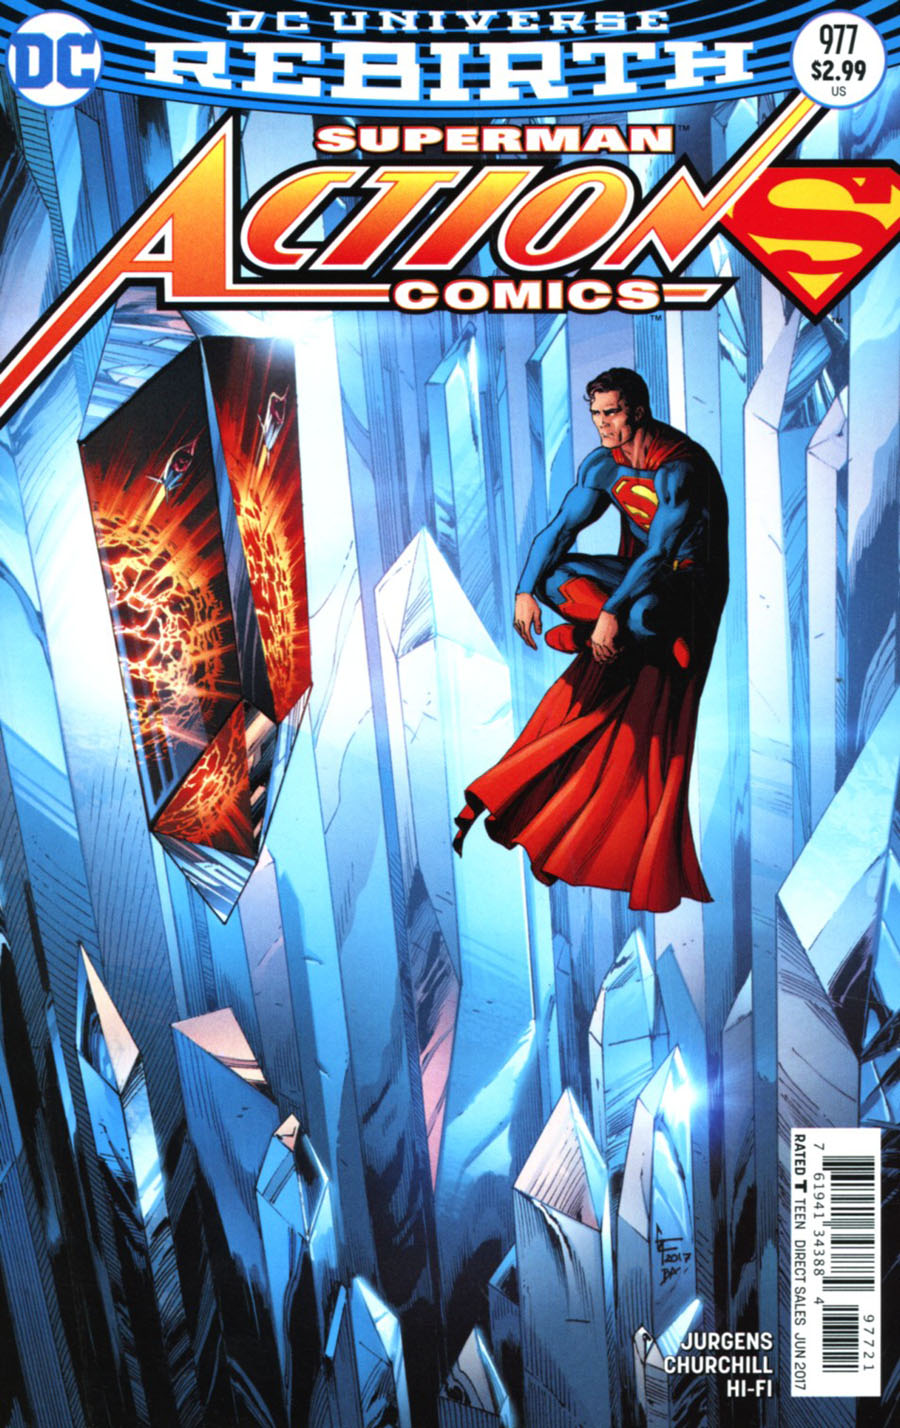 Action Comics Vol 2 #977 Cover B Variant Gary Frank Cover (Superman Reborn Aftermath Tie-In)